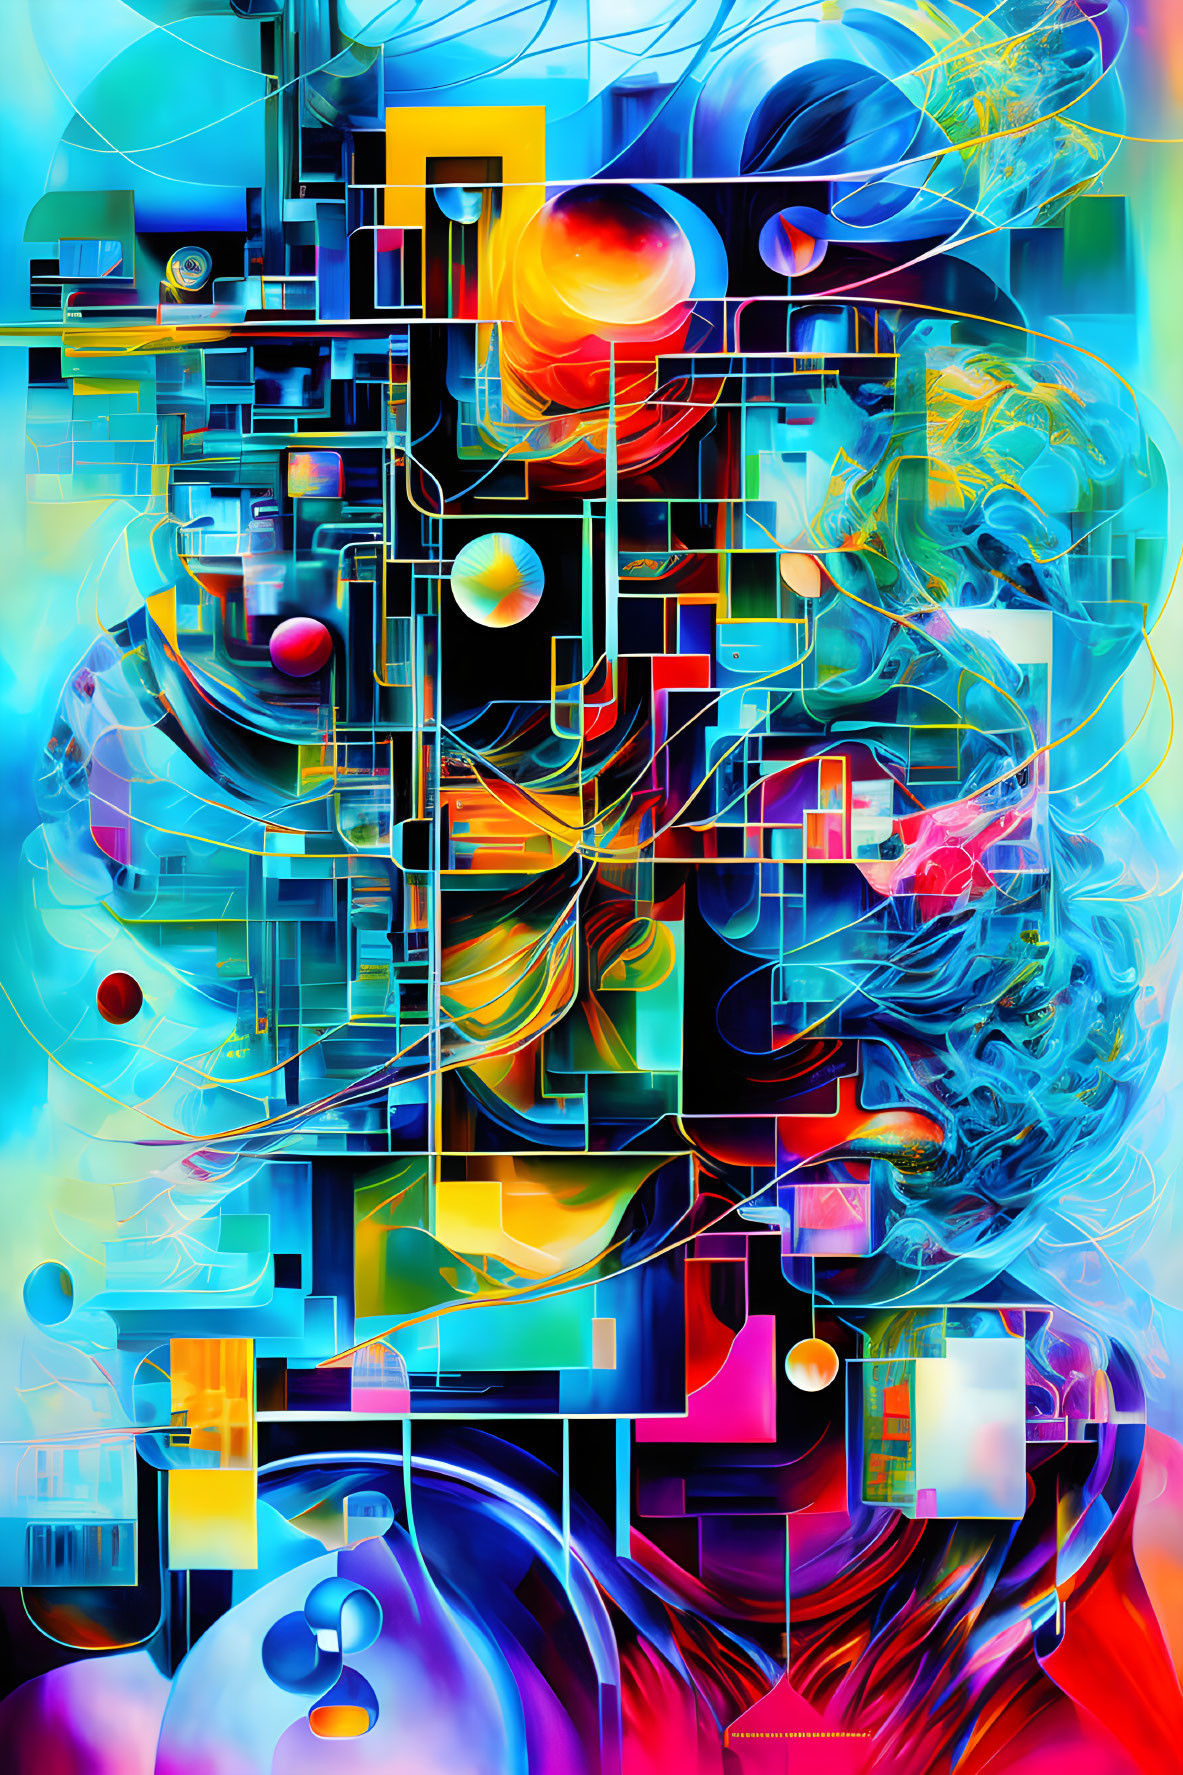 Colorful abstract digital art with geometric patterns and surreal face-like forms